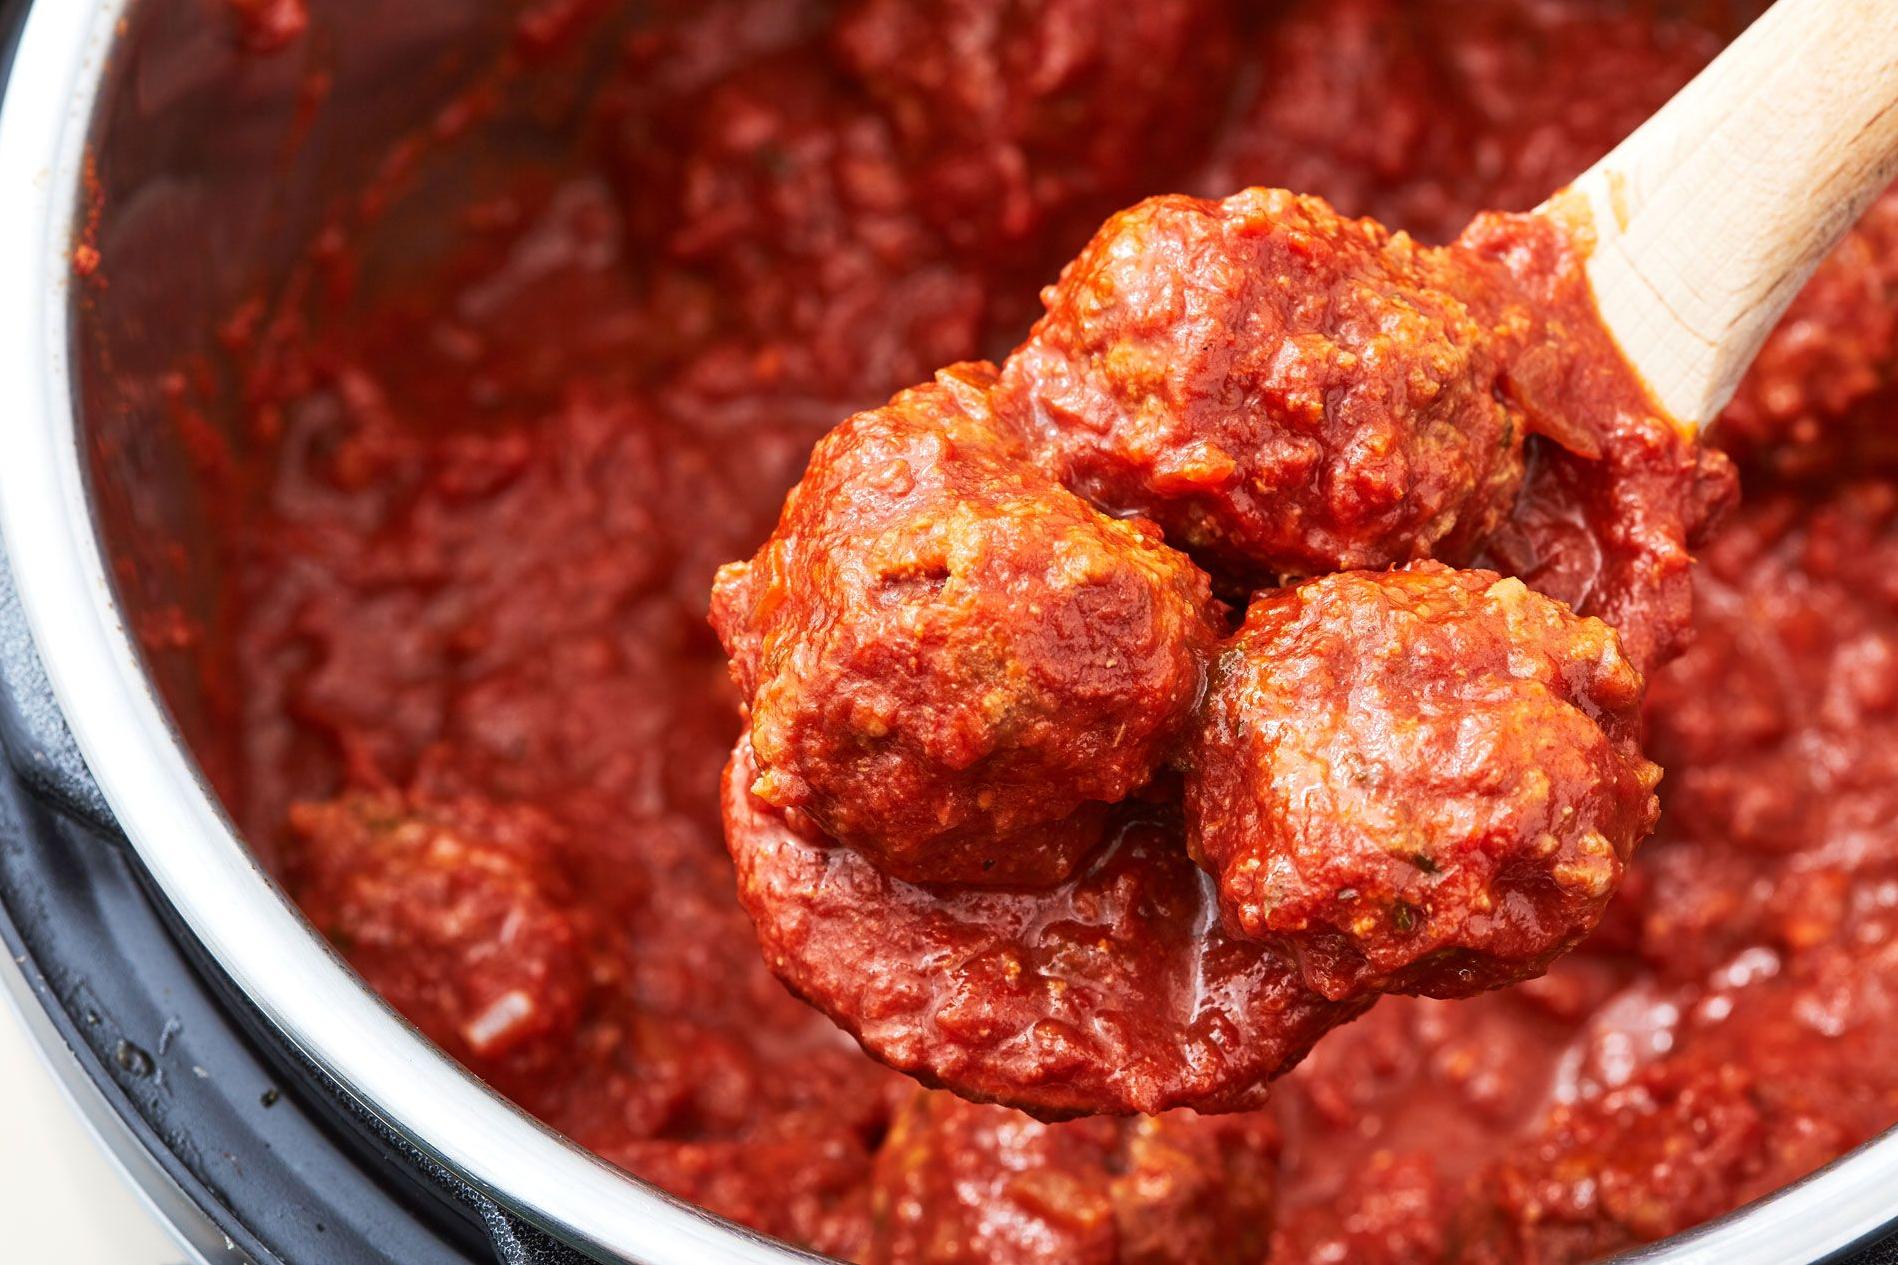  These meatballs are so flavorful, you'll want to eat them straight from the pot!